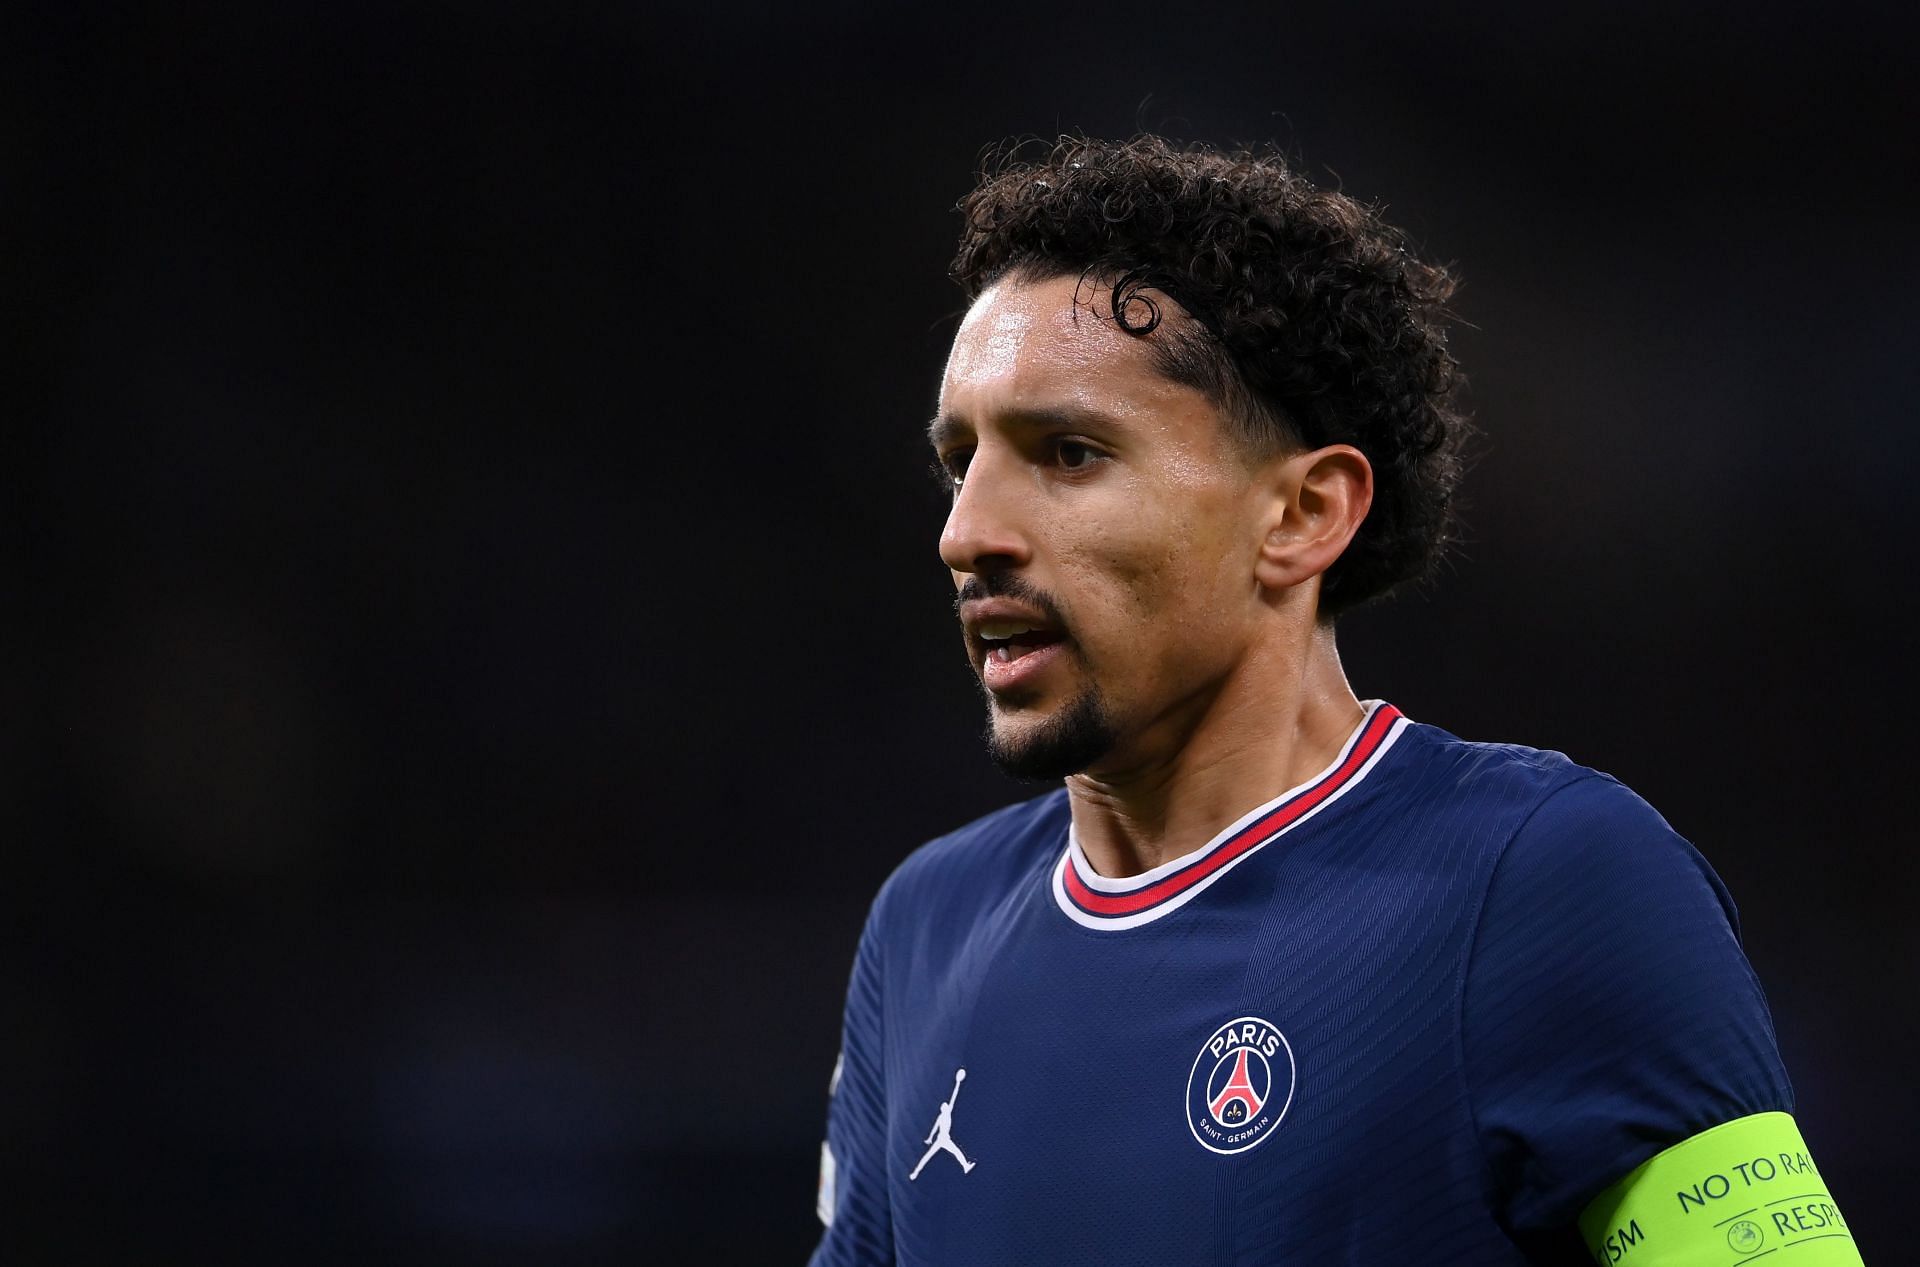 Marquinhos has been a key player for Les Parisiens over the years